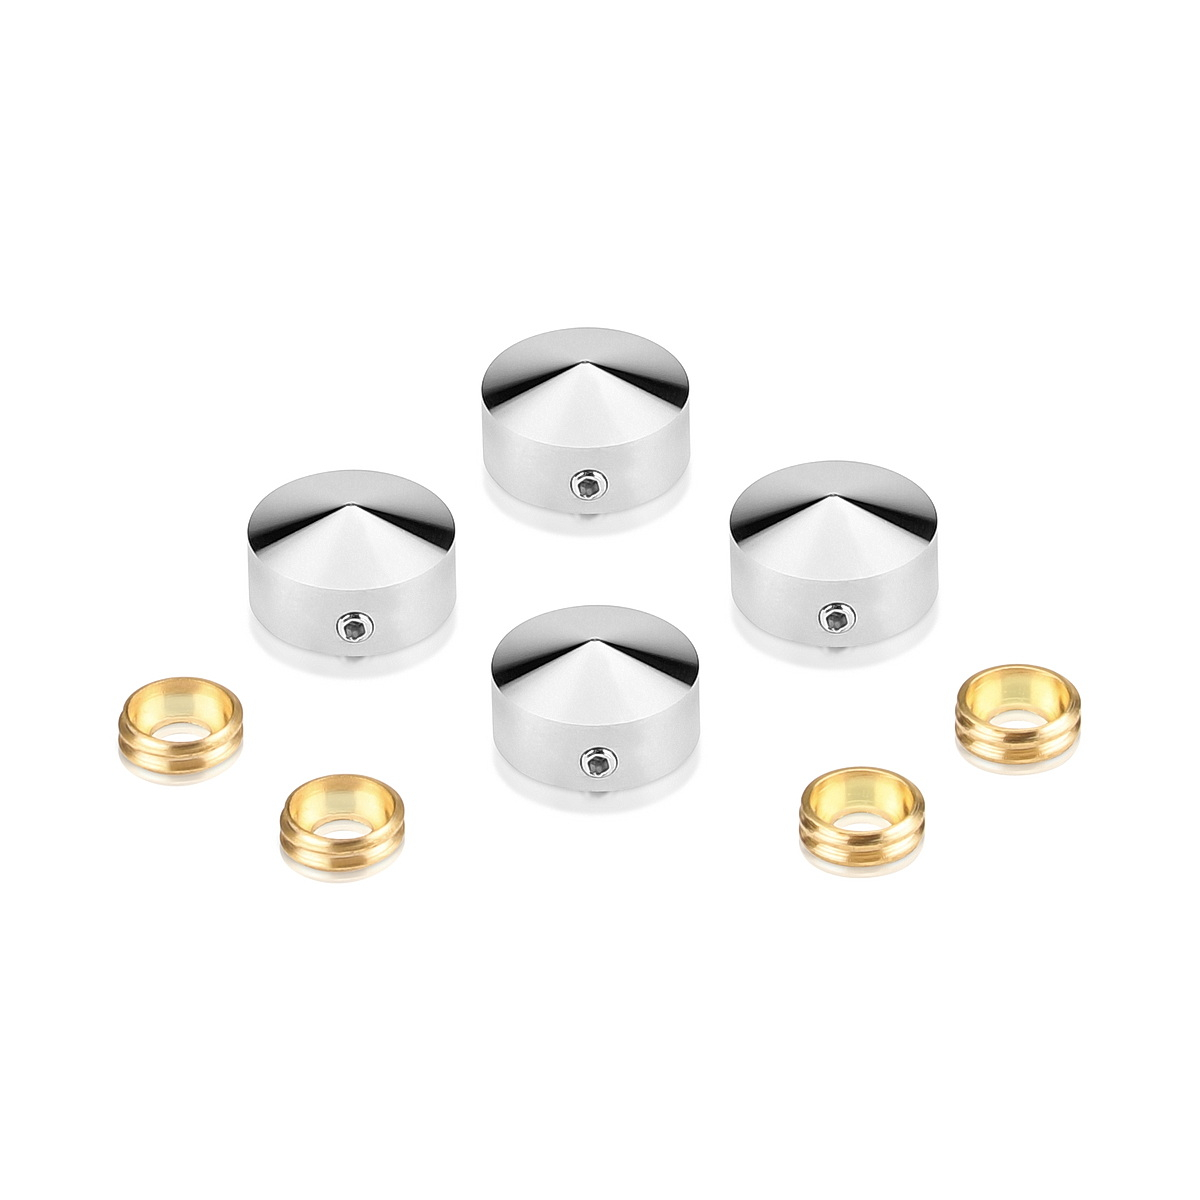 Set of 4 Conical Locking Screw Cover Diameter 5/8'', Satin Brushed Stainless Steel Finish (Indoor or Outdoor)